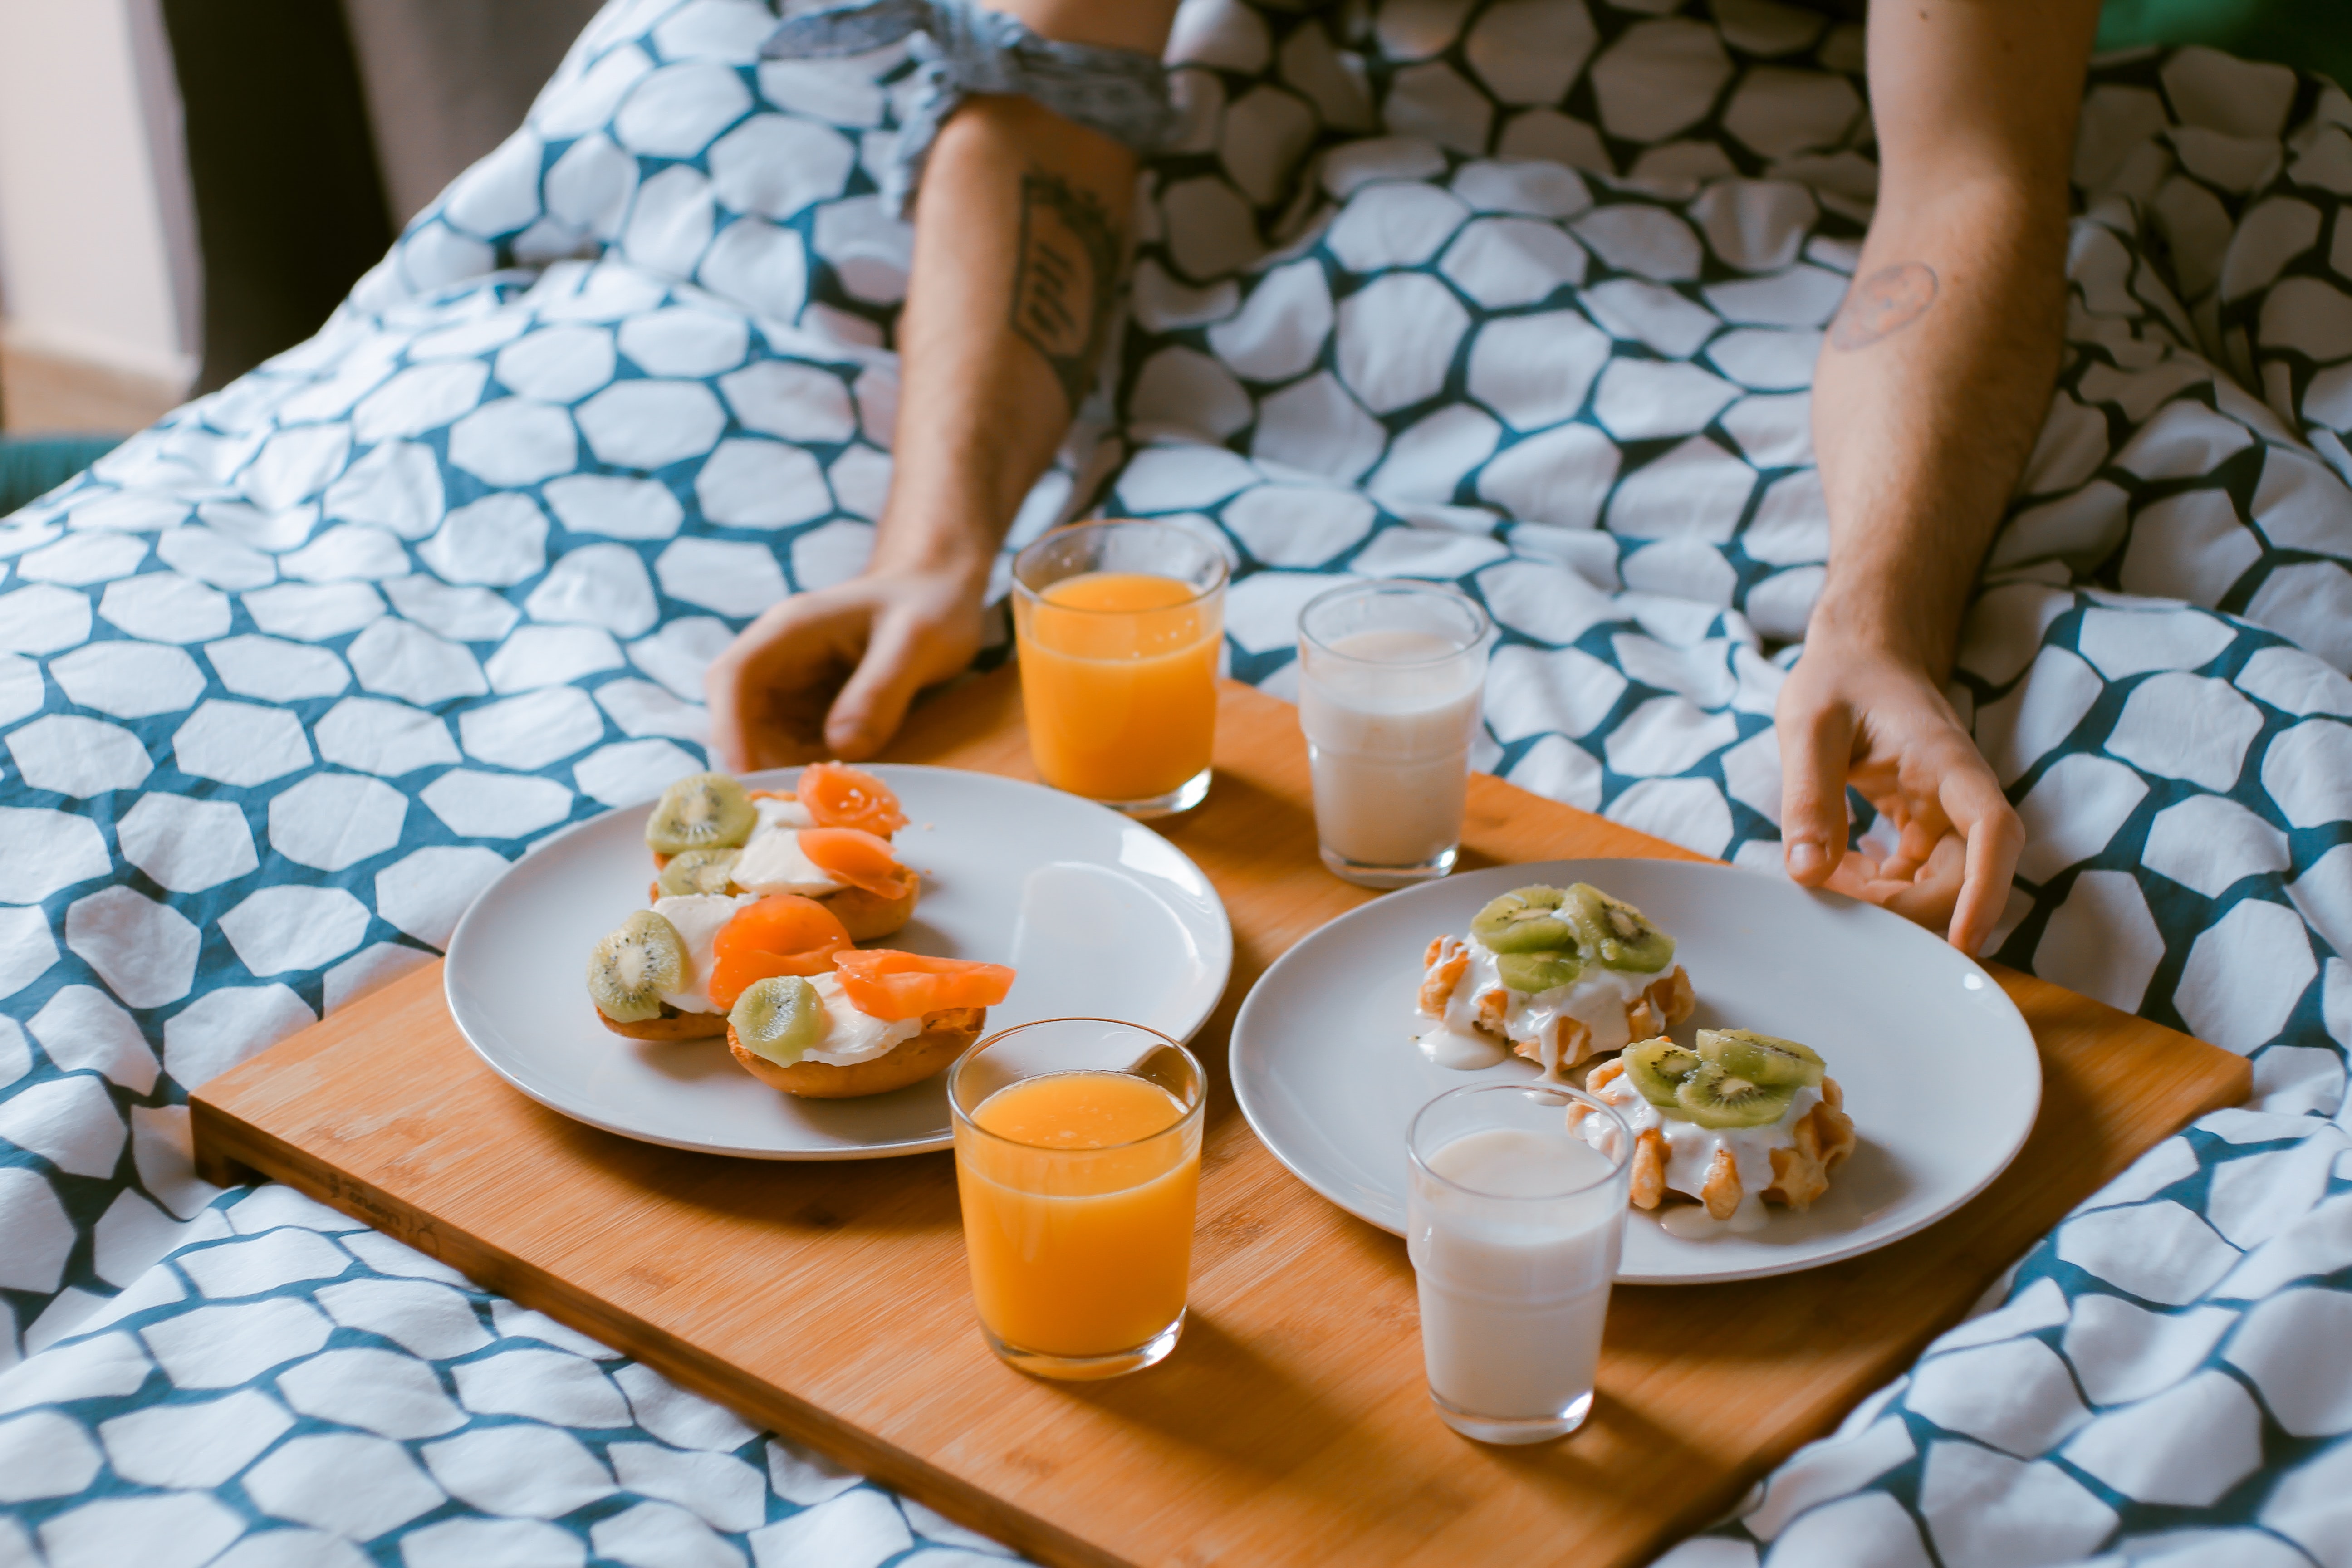 Avo Smash to Pastry Treats - Your guide to Mother's Day Breaky in Bed